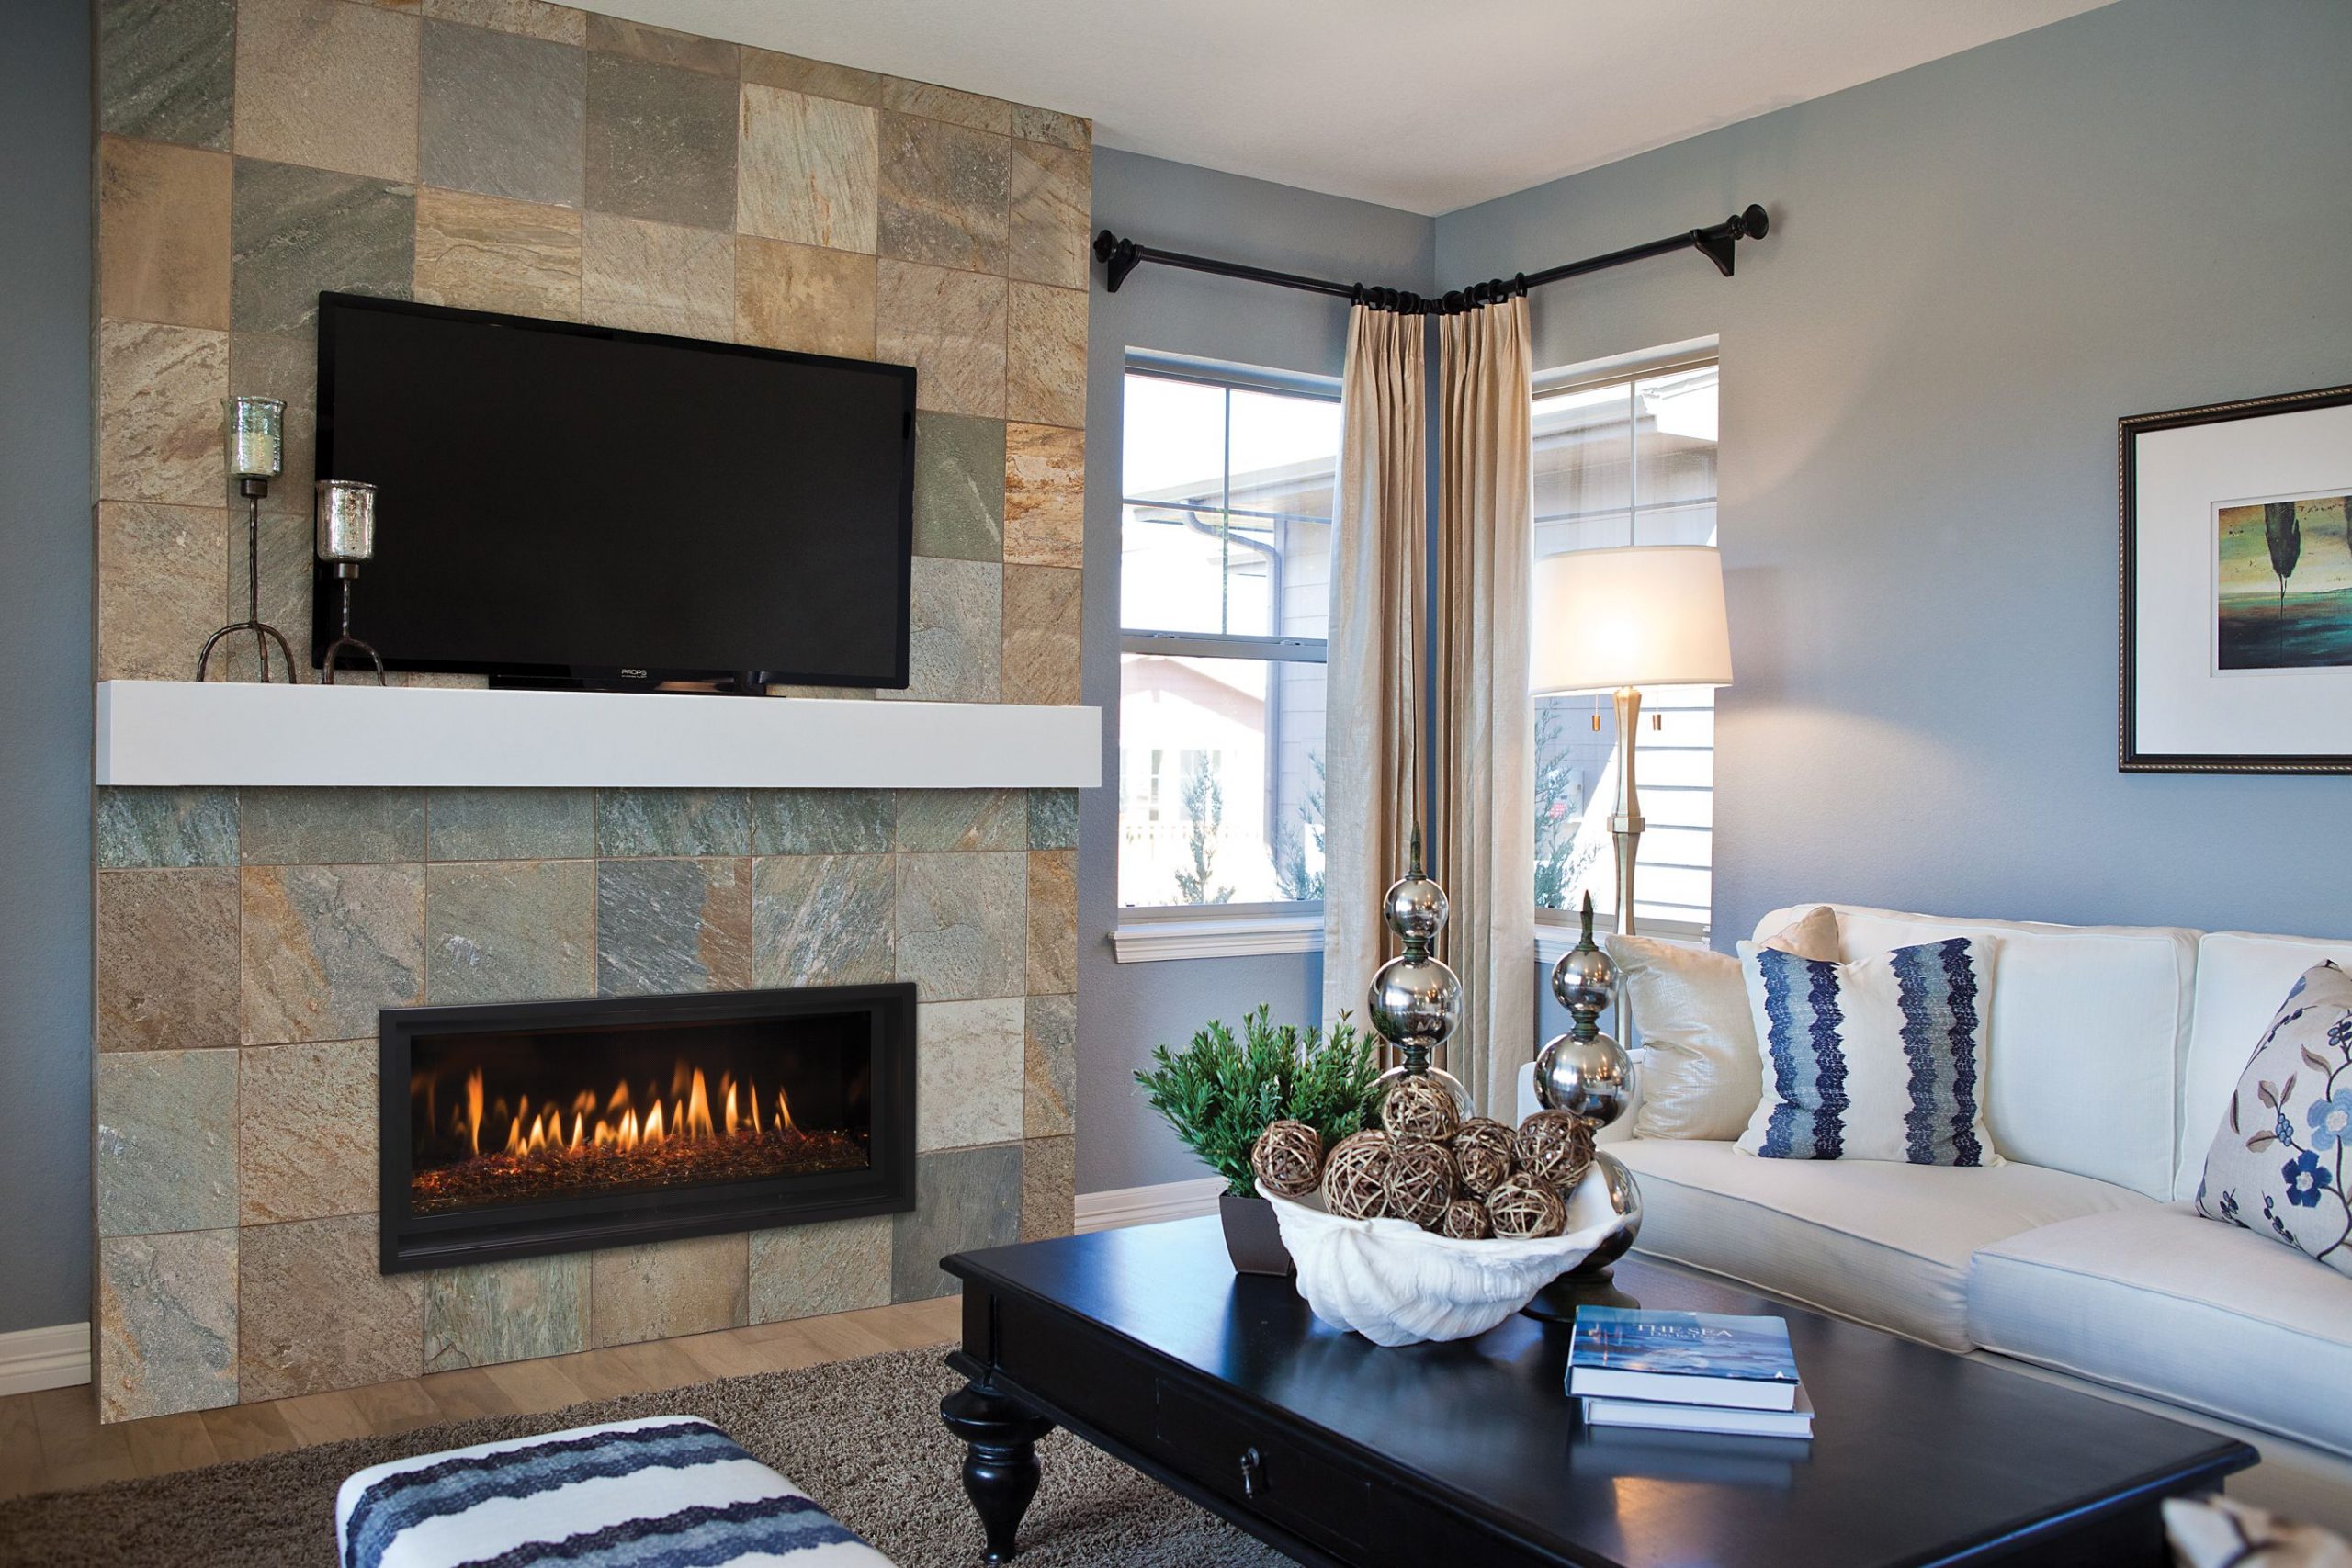 How to Best Plan for a Fireplace Installation